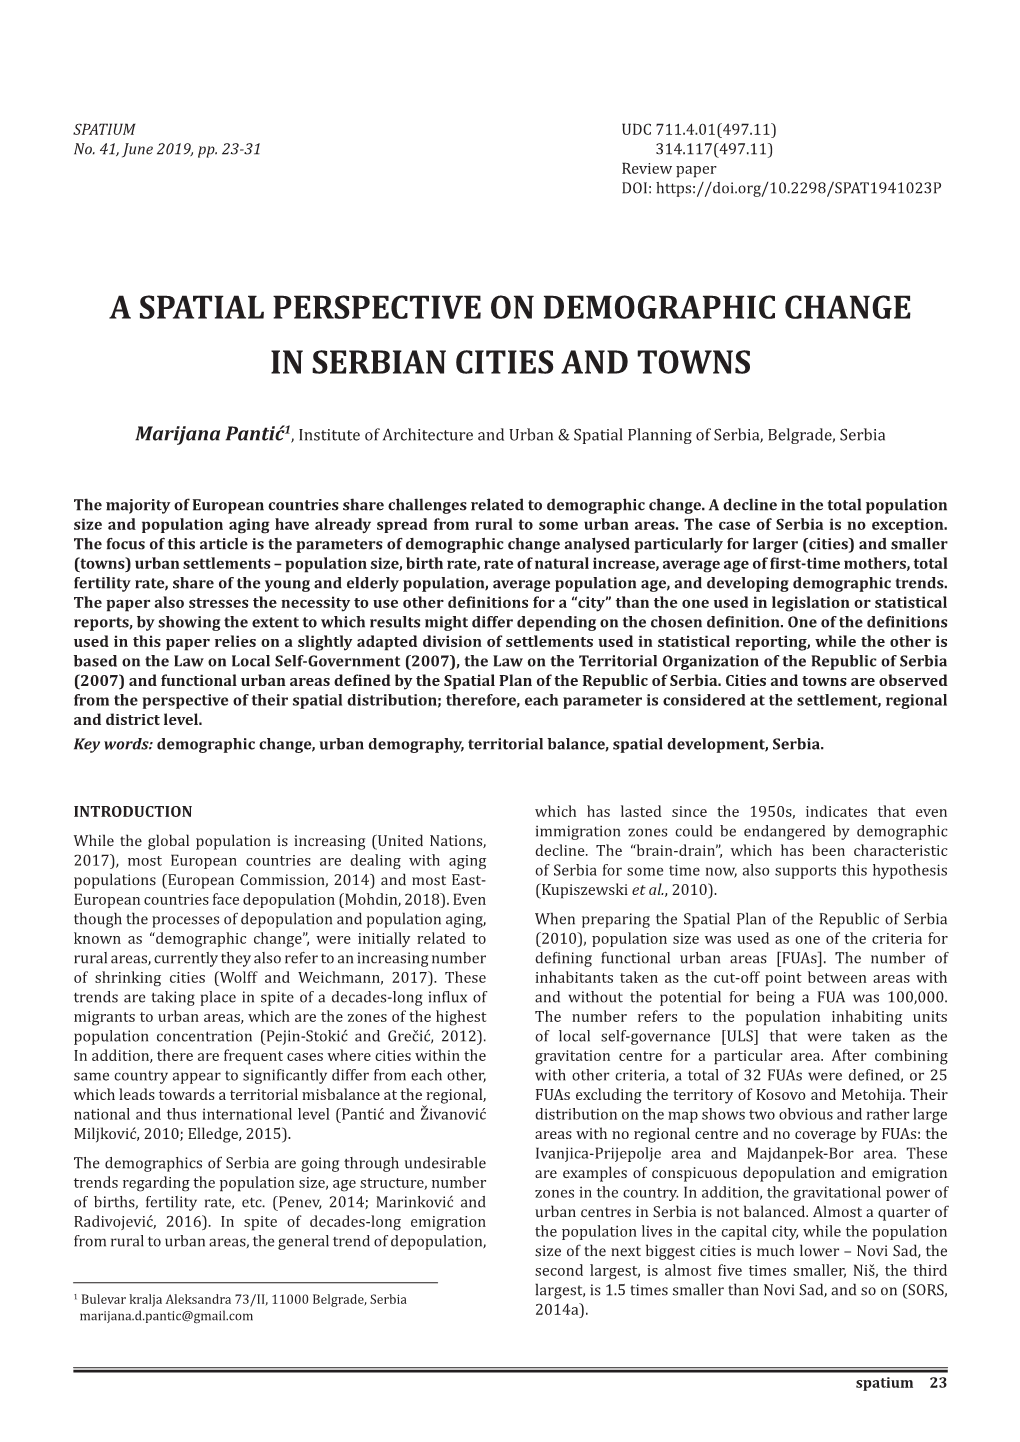 A Spatial Perspective on Demographic Change in Serbian Cities and Towns